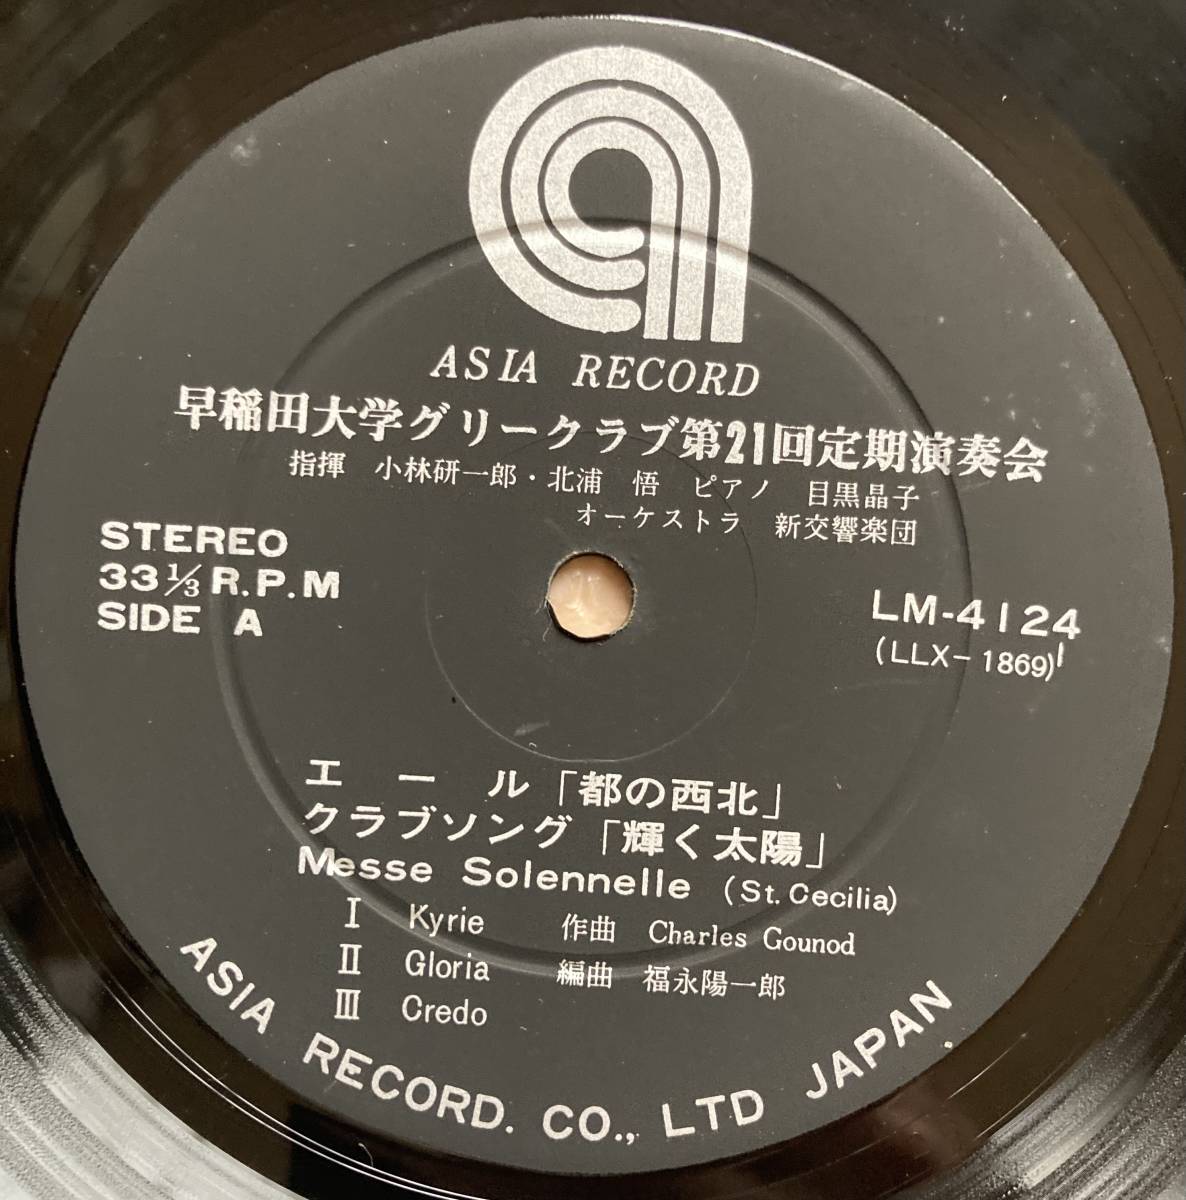  Waseda university Gree Club no. 21 times fixed period musical performance .LM-4124~5 Asia record ASIA RECORD piano eyes black ..